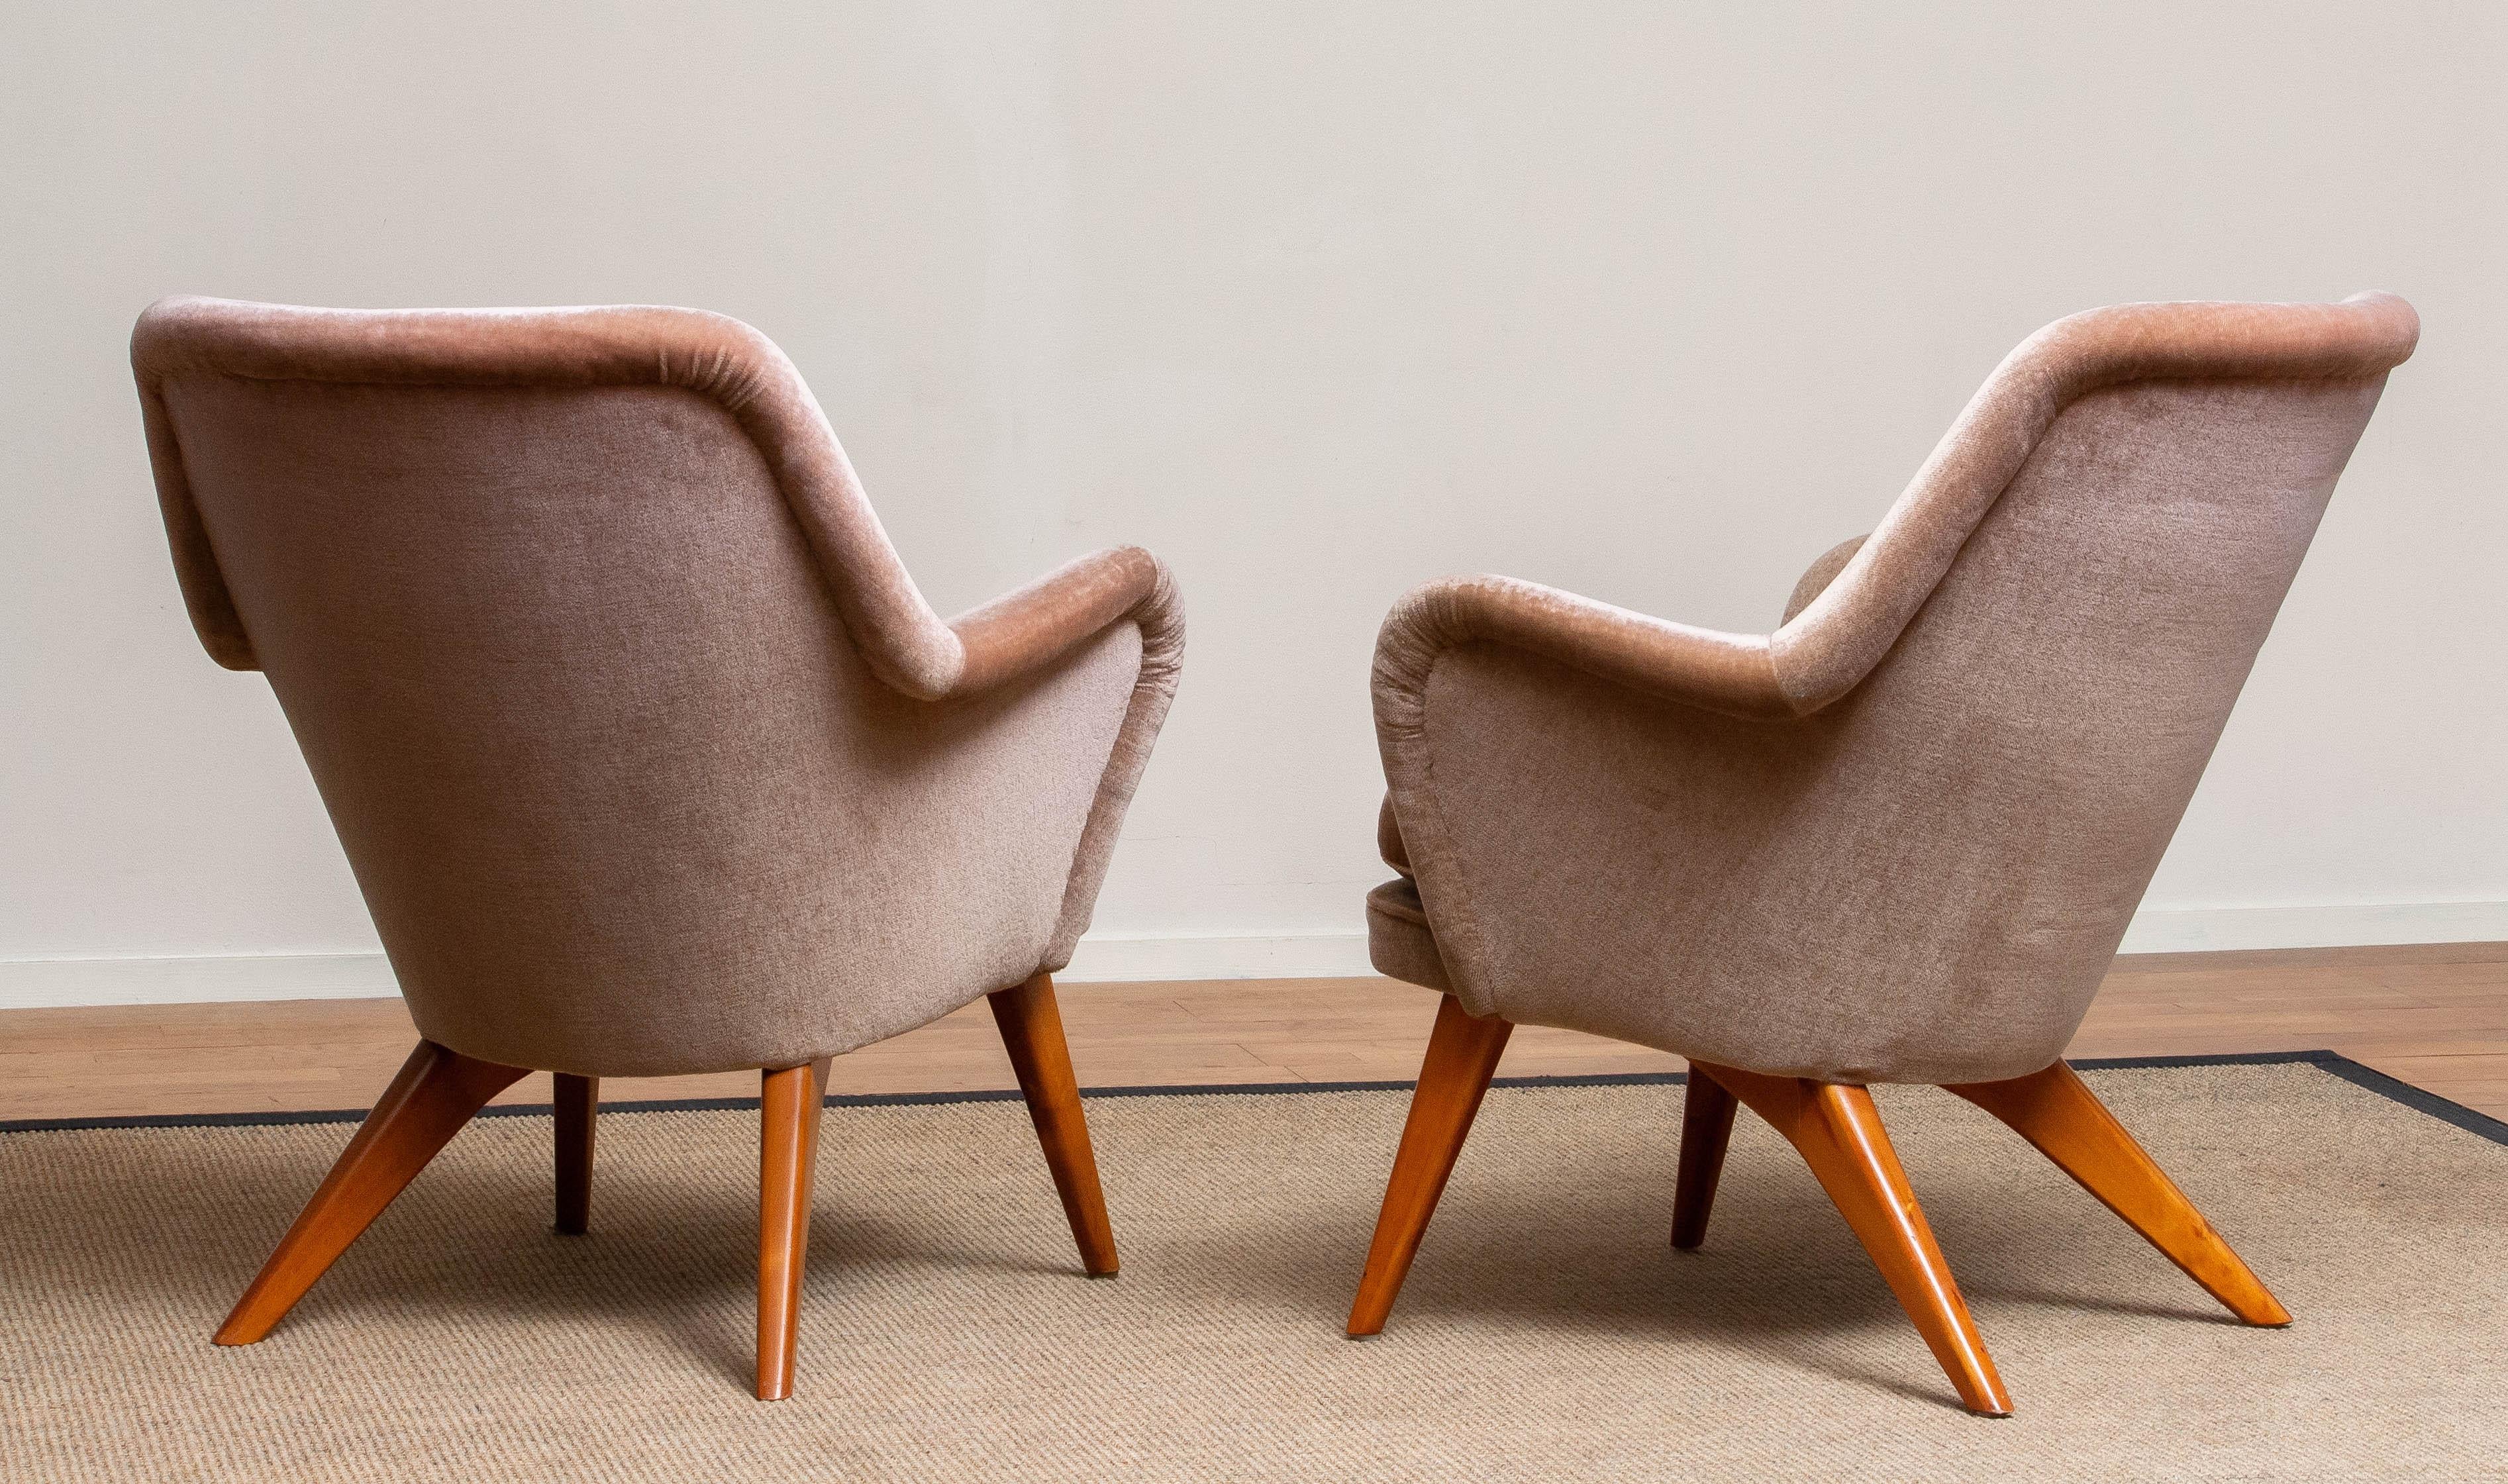 Mid-20th Century 1950s Pair of Chairs by Carl Gustav Hiort af Ornäs for Puunveisto Oy-Trasnideri